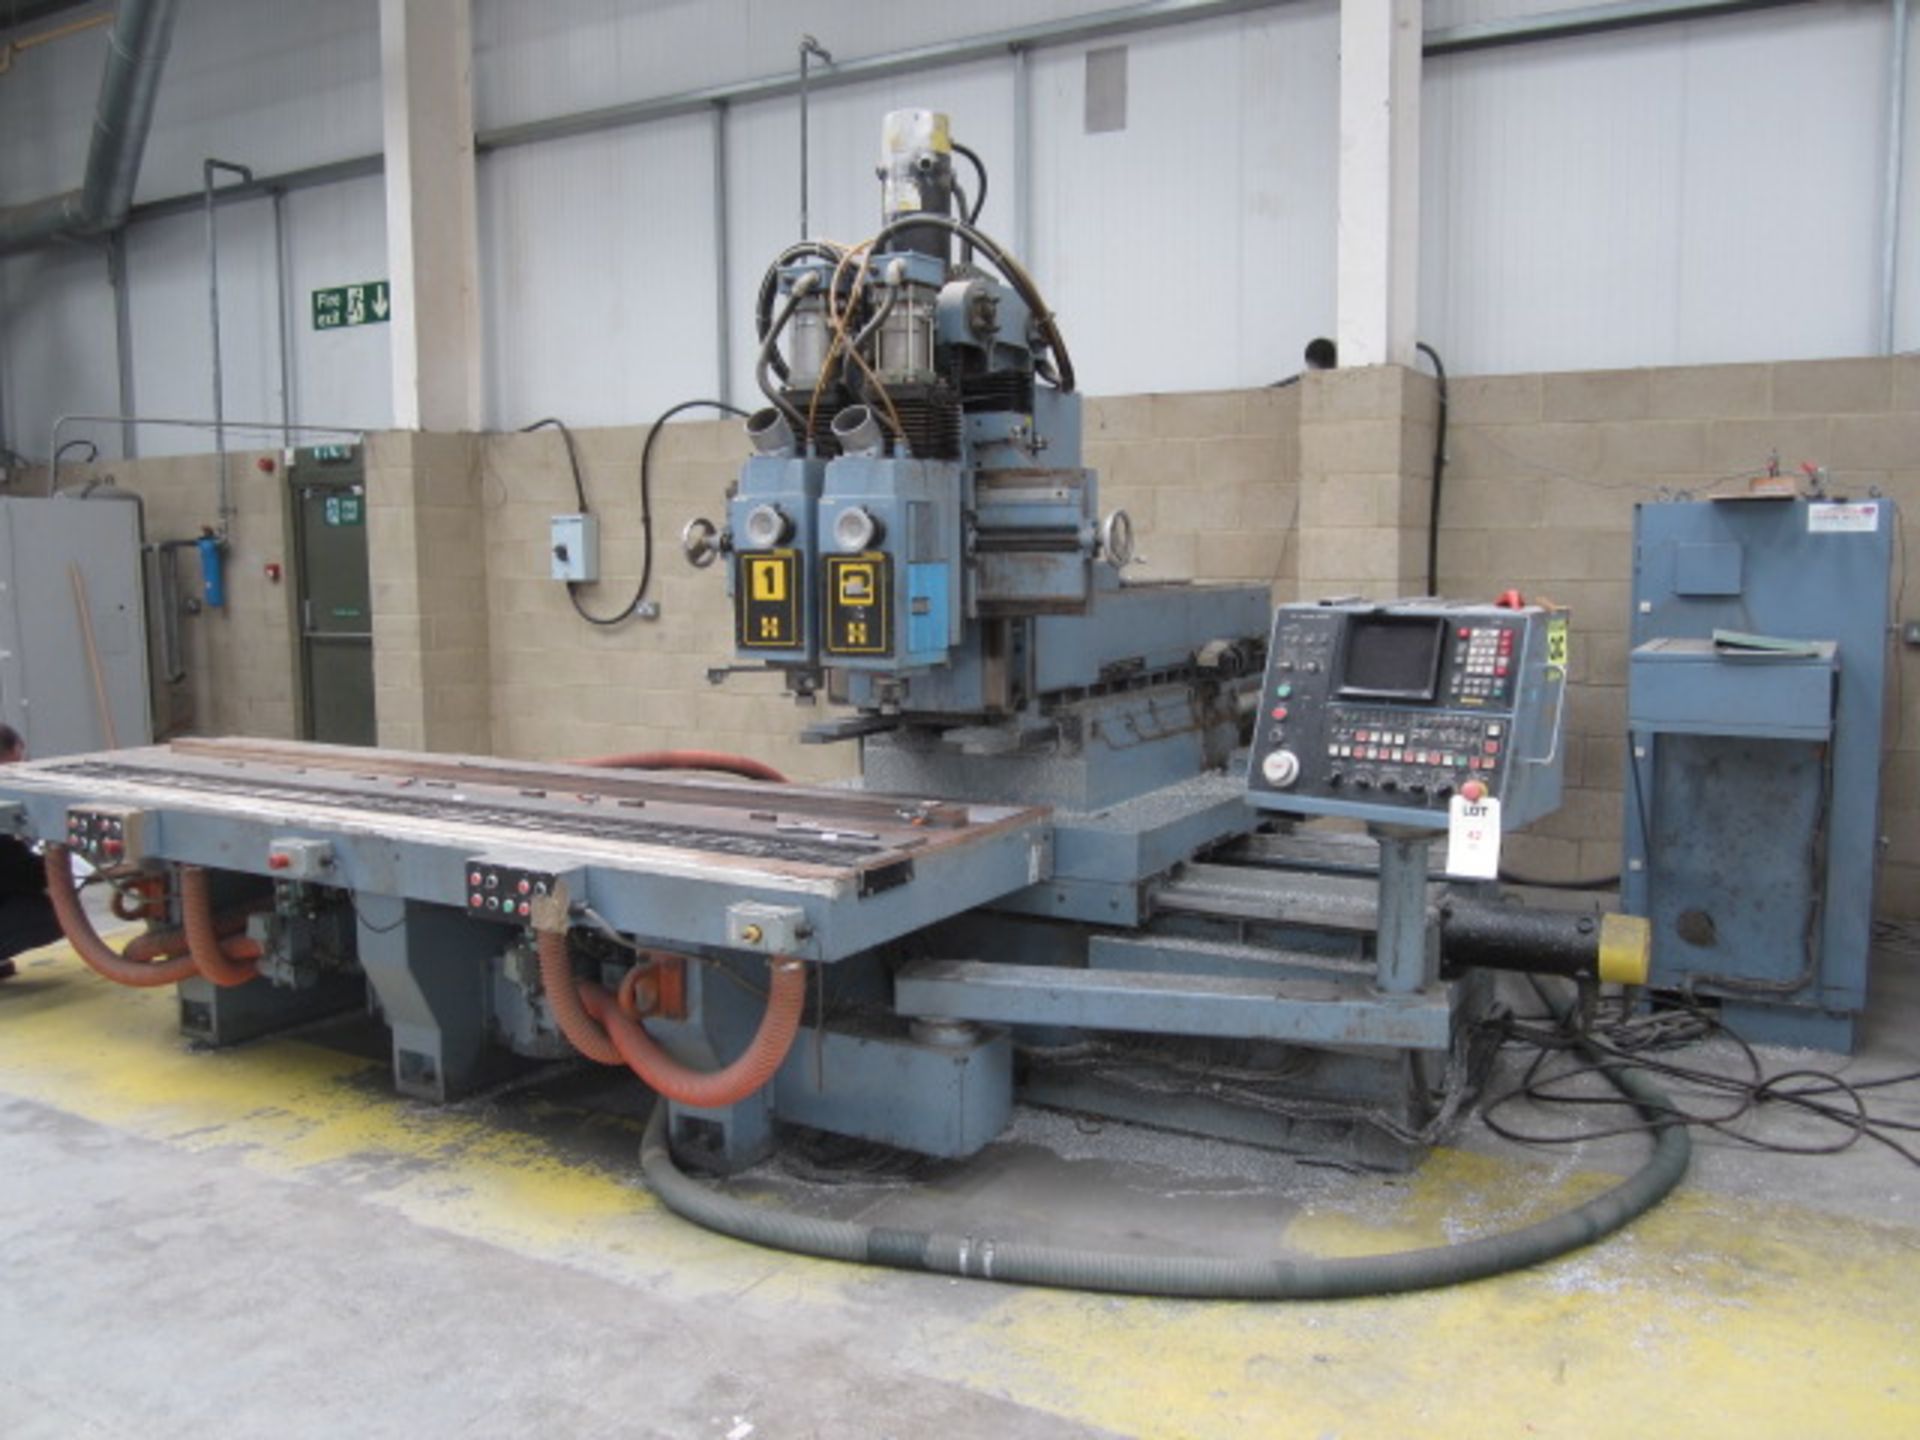 Heian NZ-2H CNC 2 head router, 3 axis, vacuum table size 3- 3000mm x 1000mm, serial no: 600615,